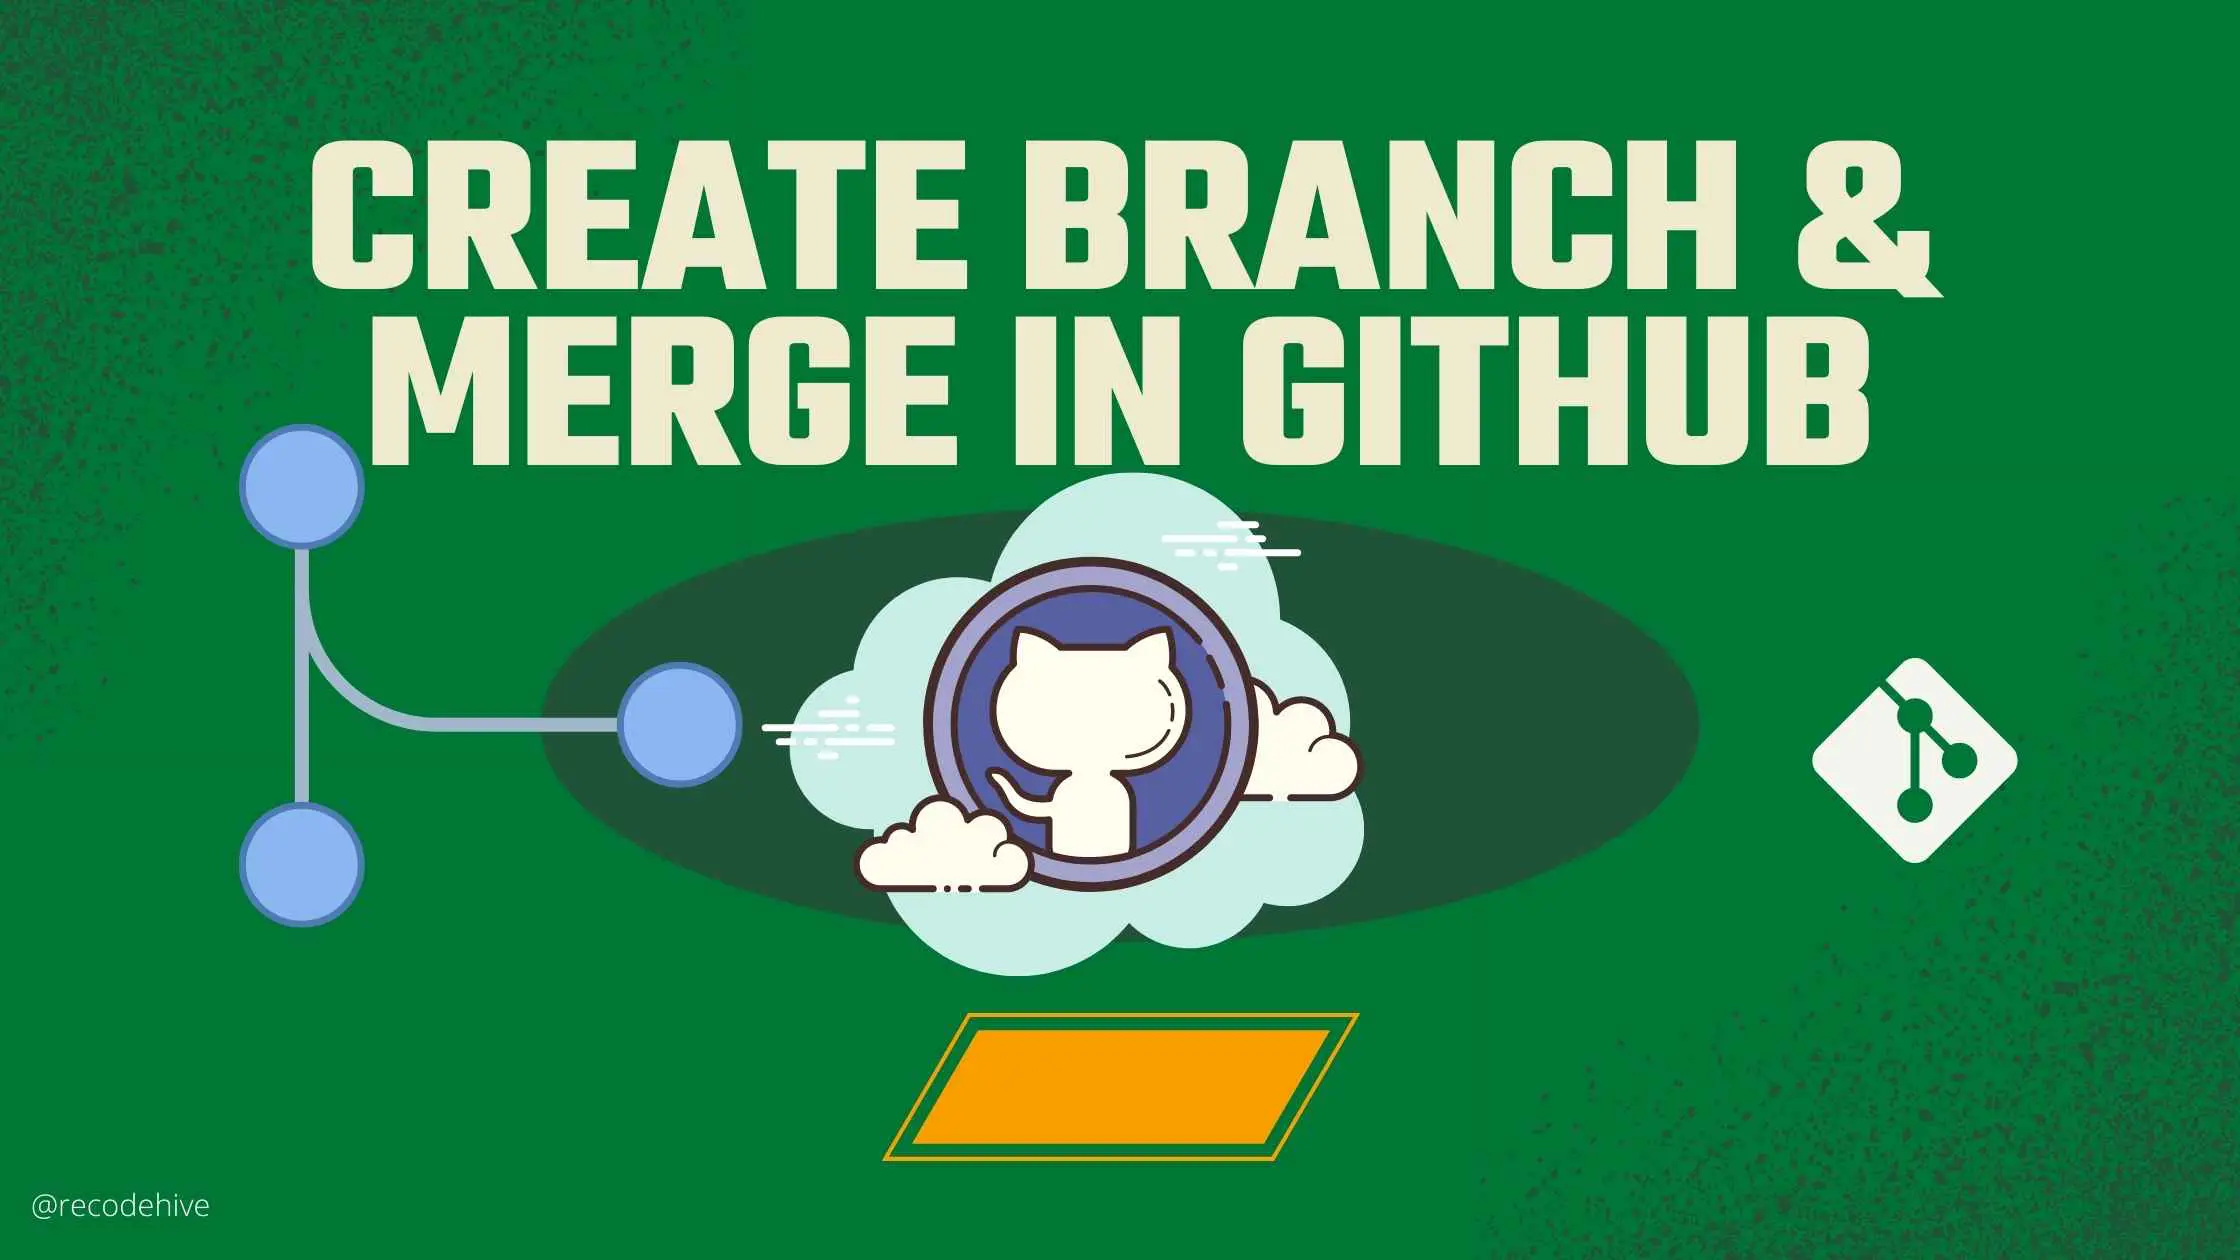 git create branch from command line